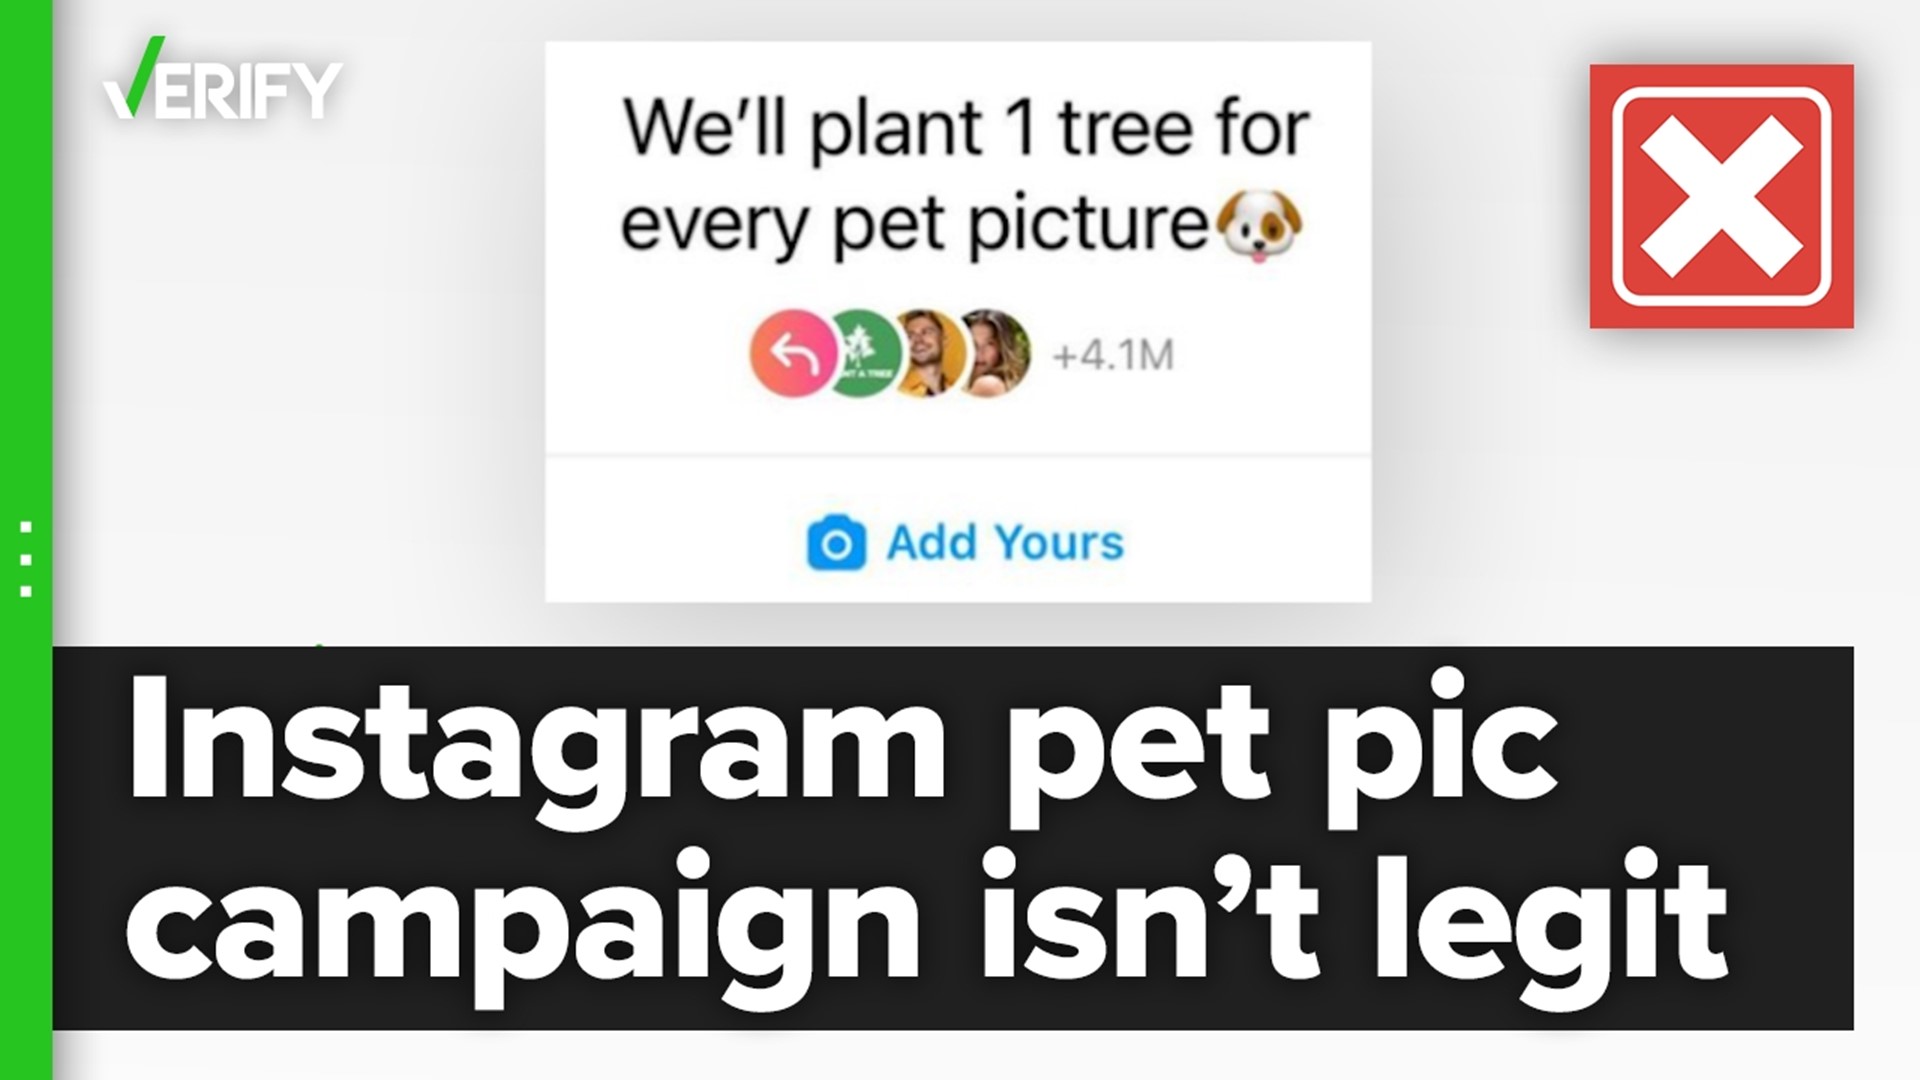 The account behind an Instagram sticker campaign with over 4 million shares confirmed it could not meet its promise to plant a tree for every pet picture shared.